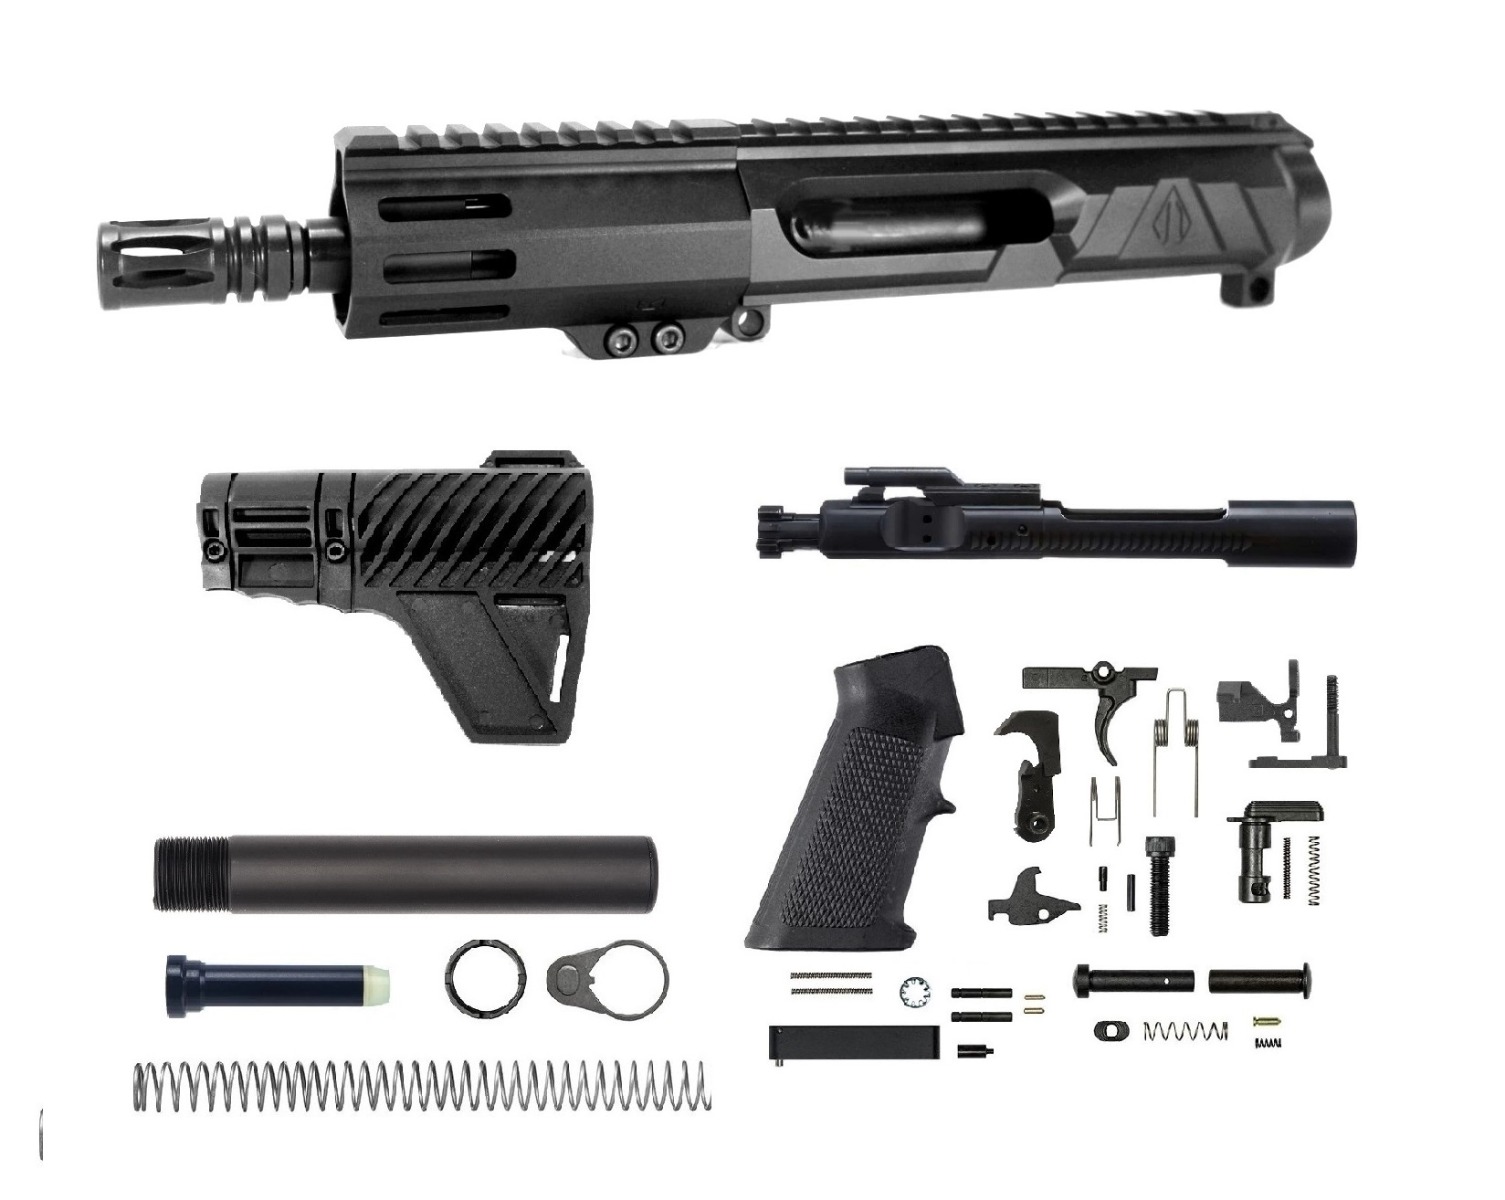 5 inch LEFT HANDED AR-15 NR Side Charging 5.56 NATO Melonite Upper Kit Suppressor Ready | Pro2a Tactical